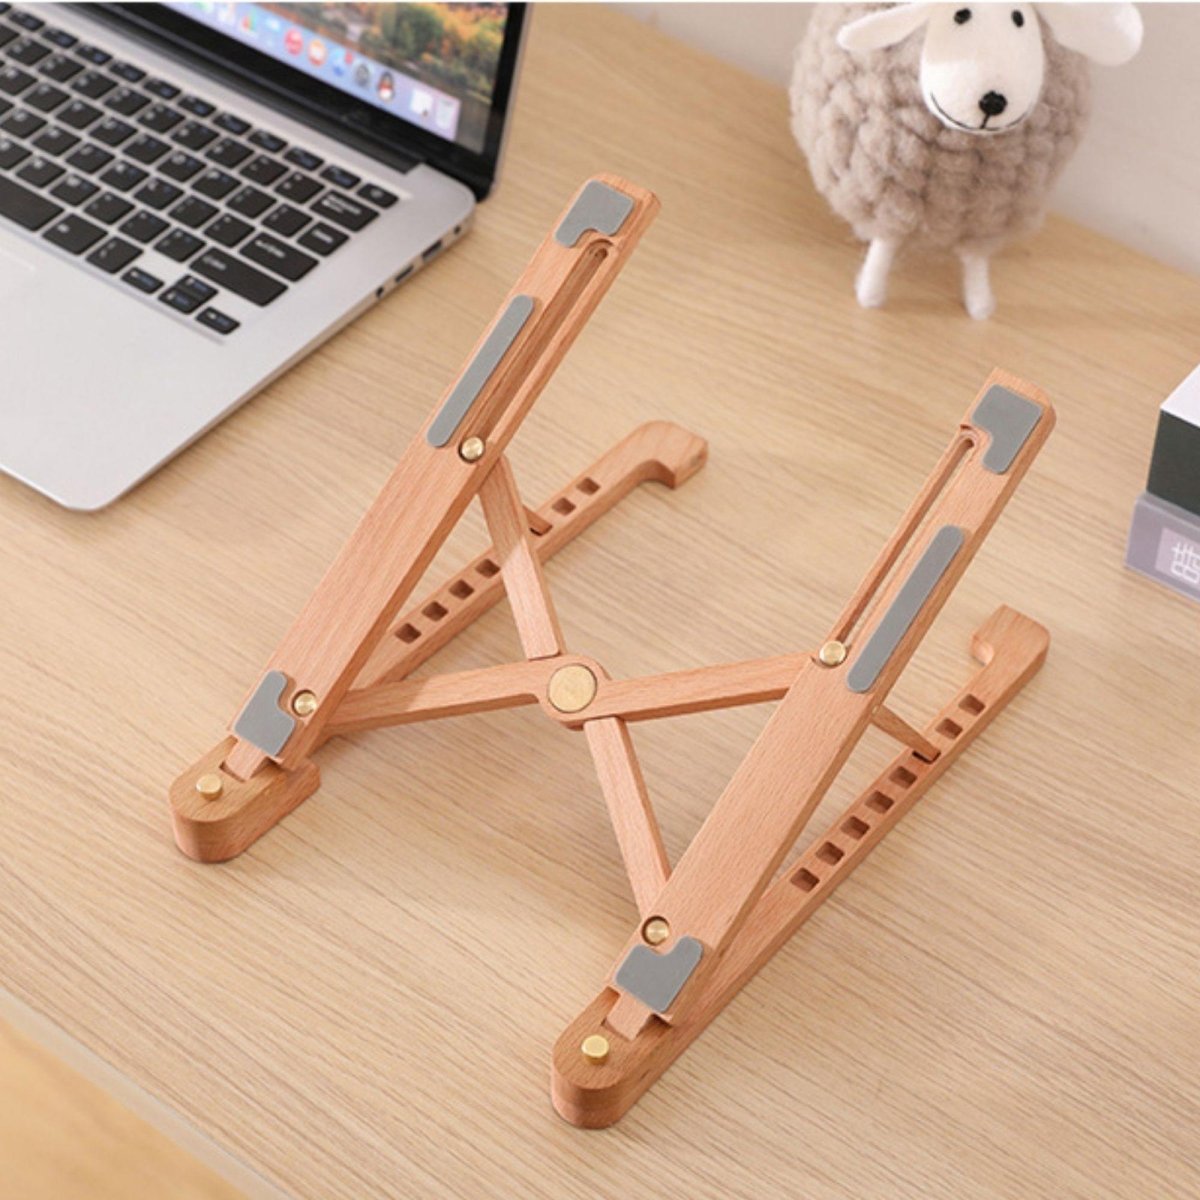 Portable Laptop Stand - iWoodStore